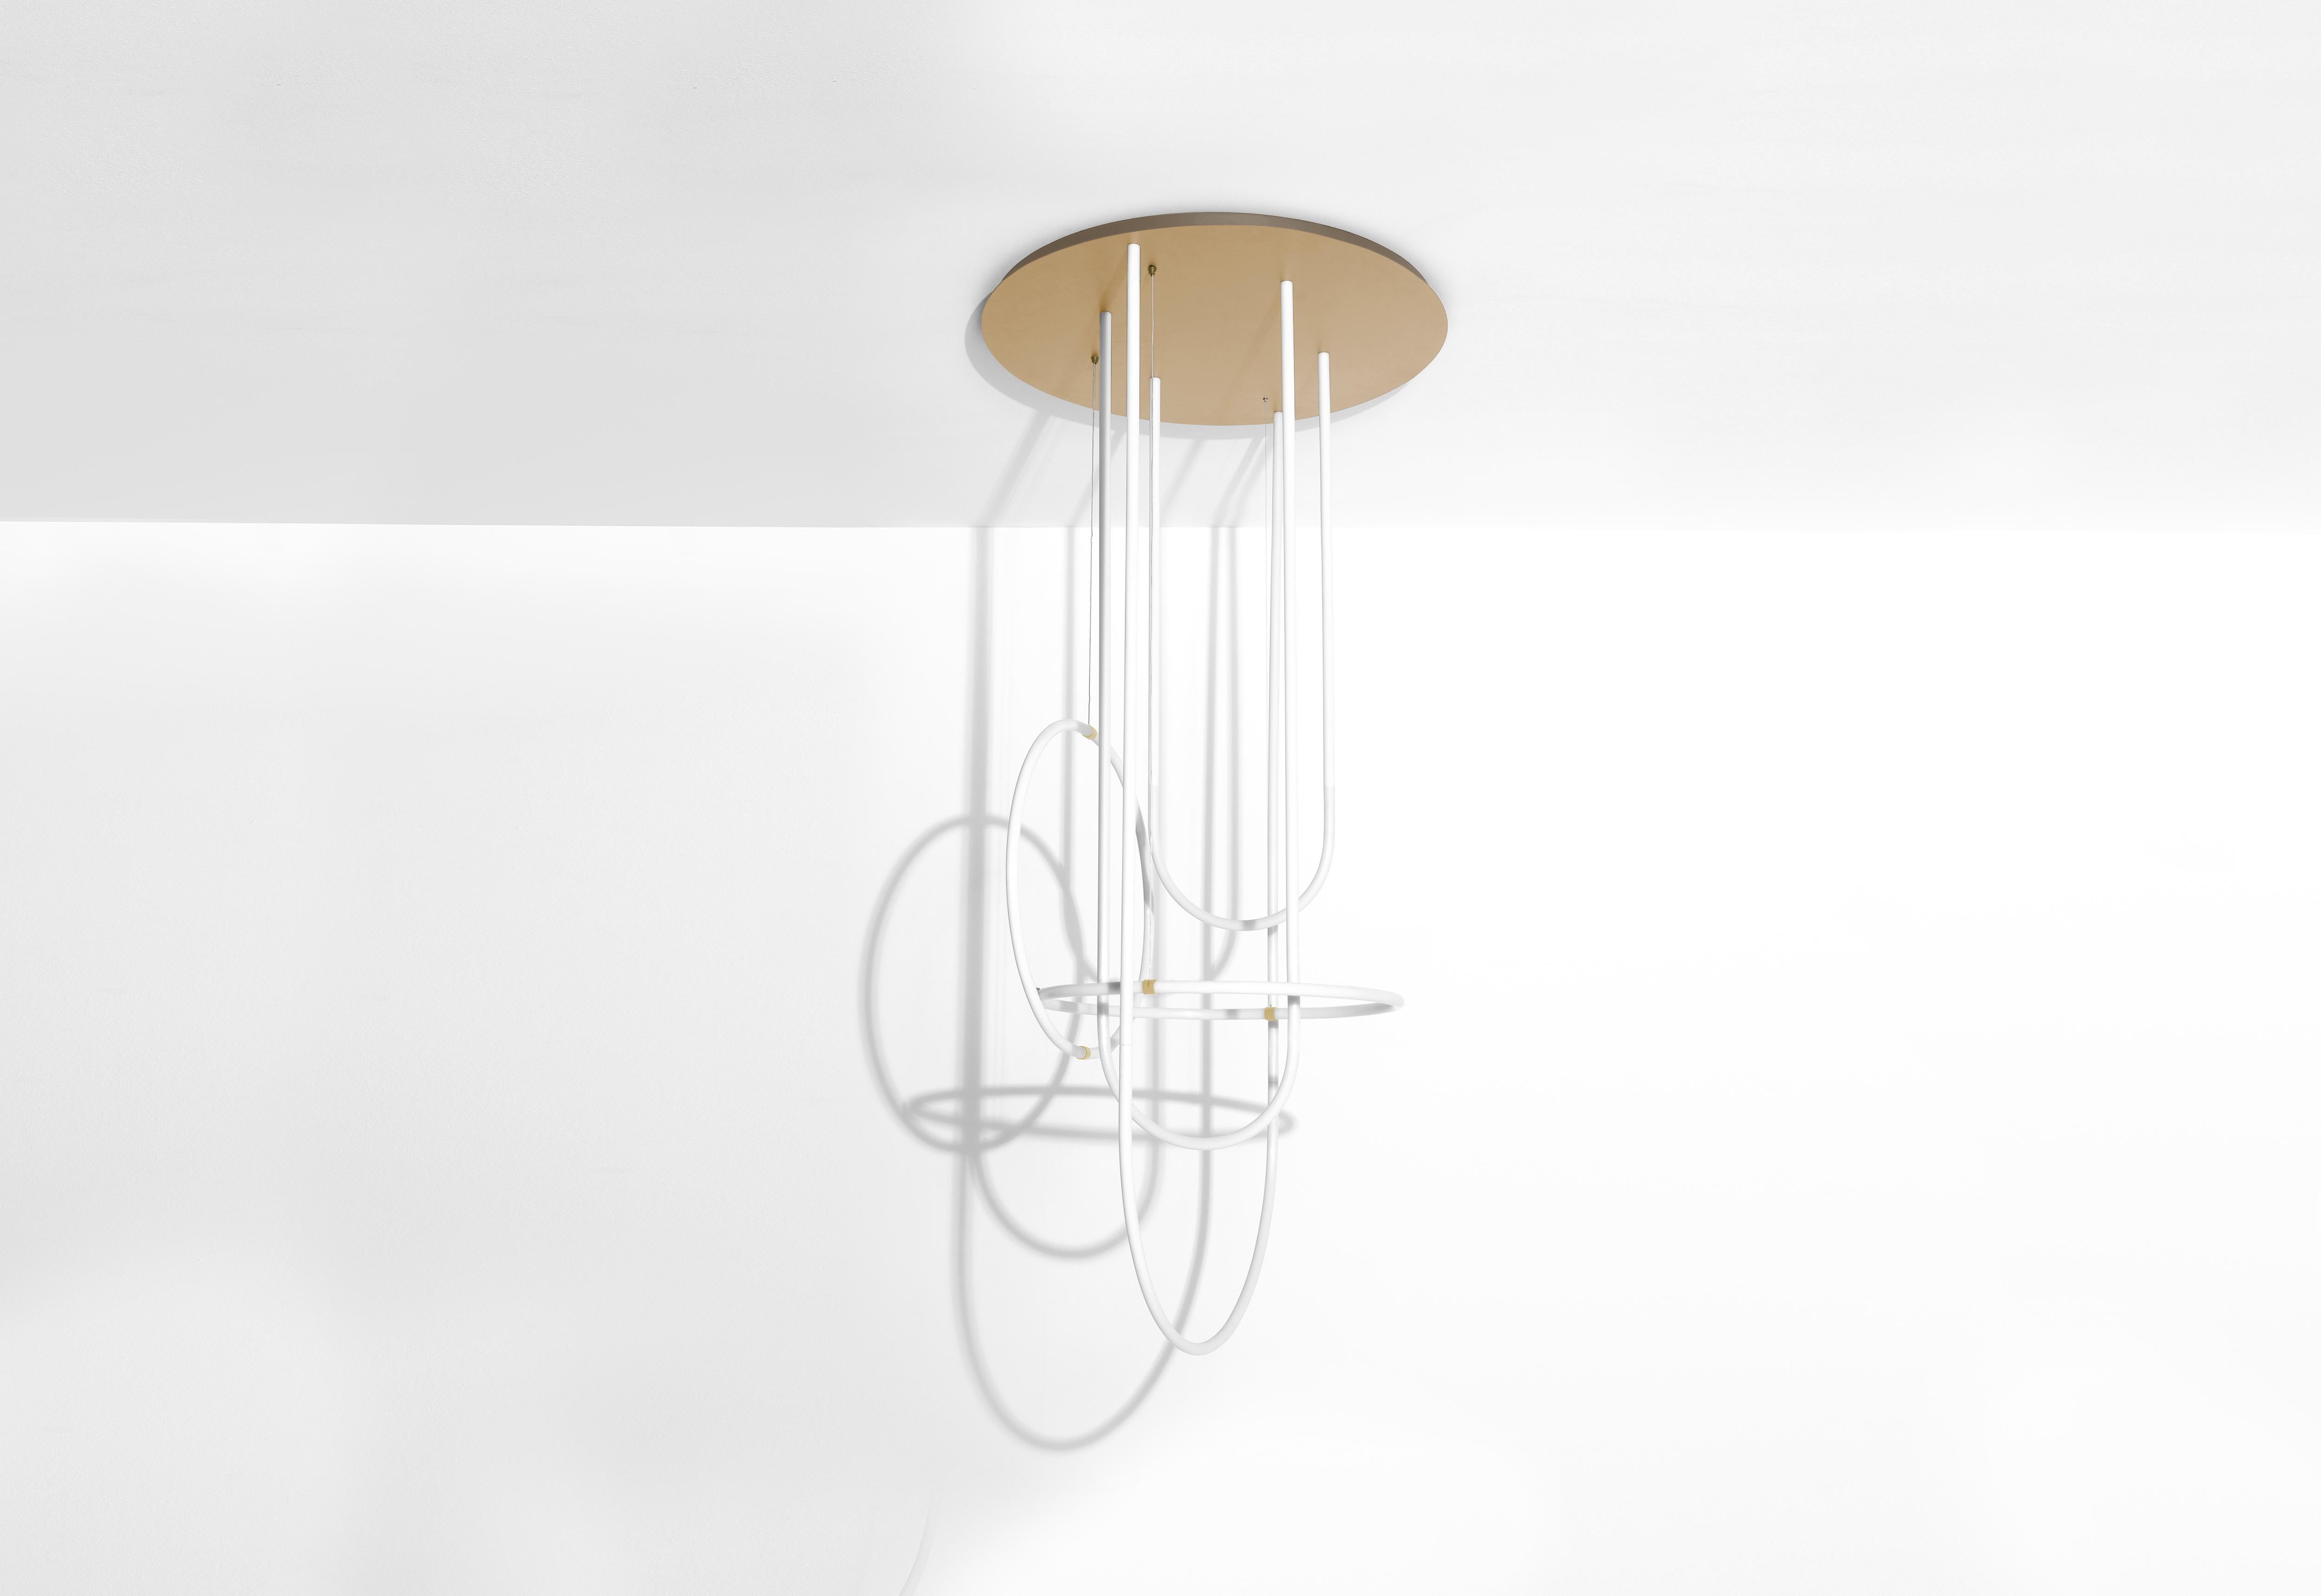 Steel Petite Friture Unseen Chandelier in Brass Transluscent with Curved LED-Lights For Sale